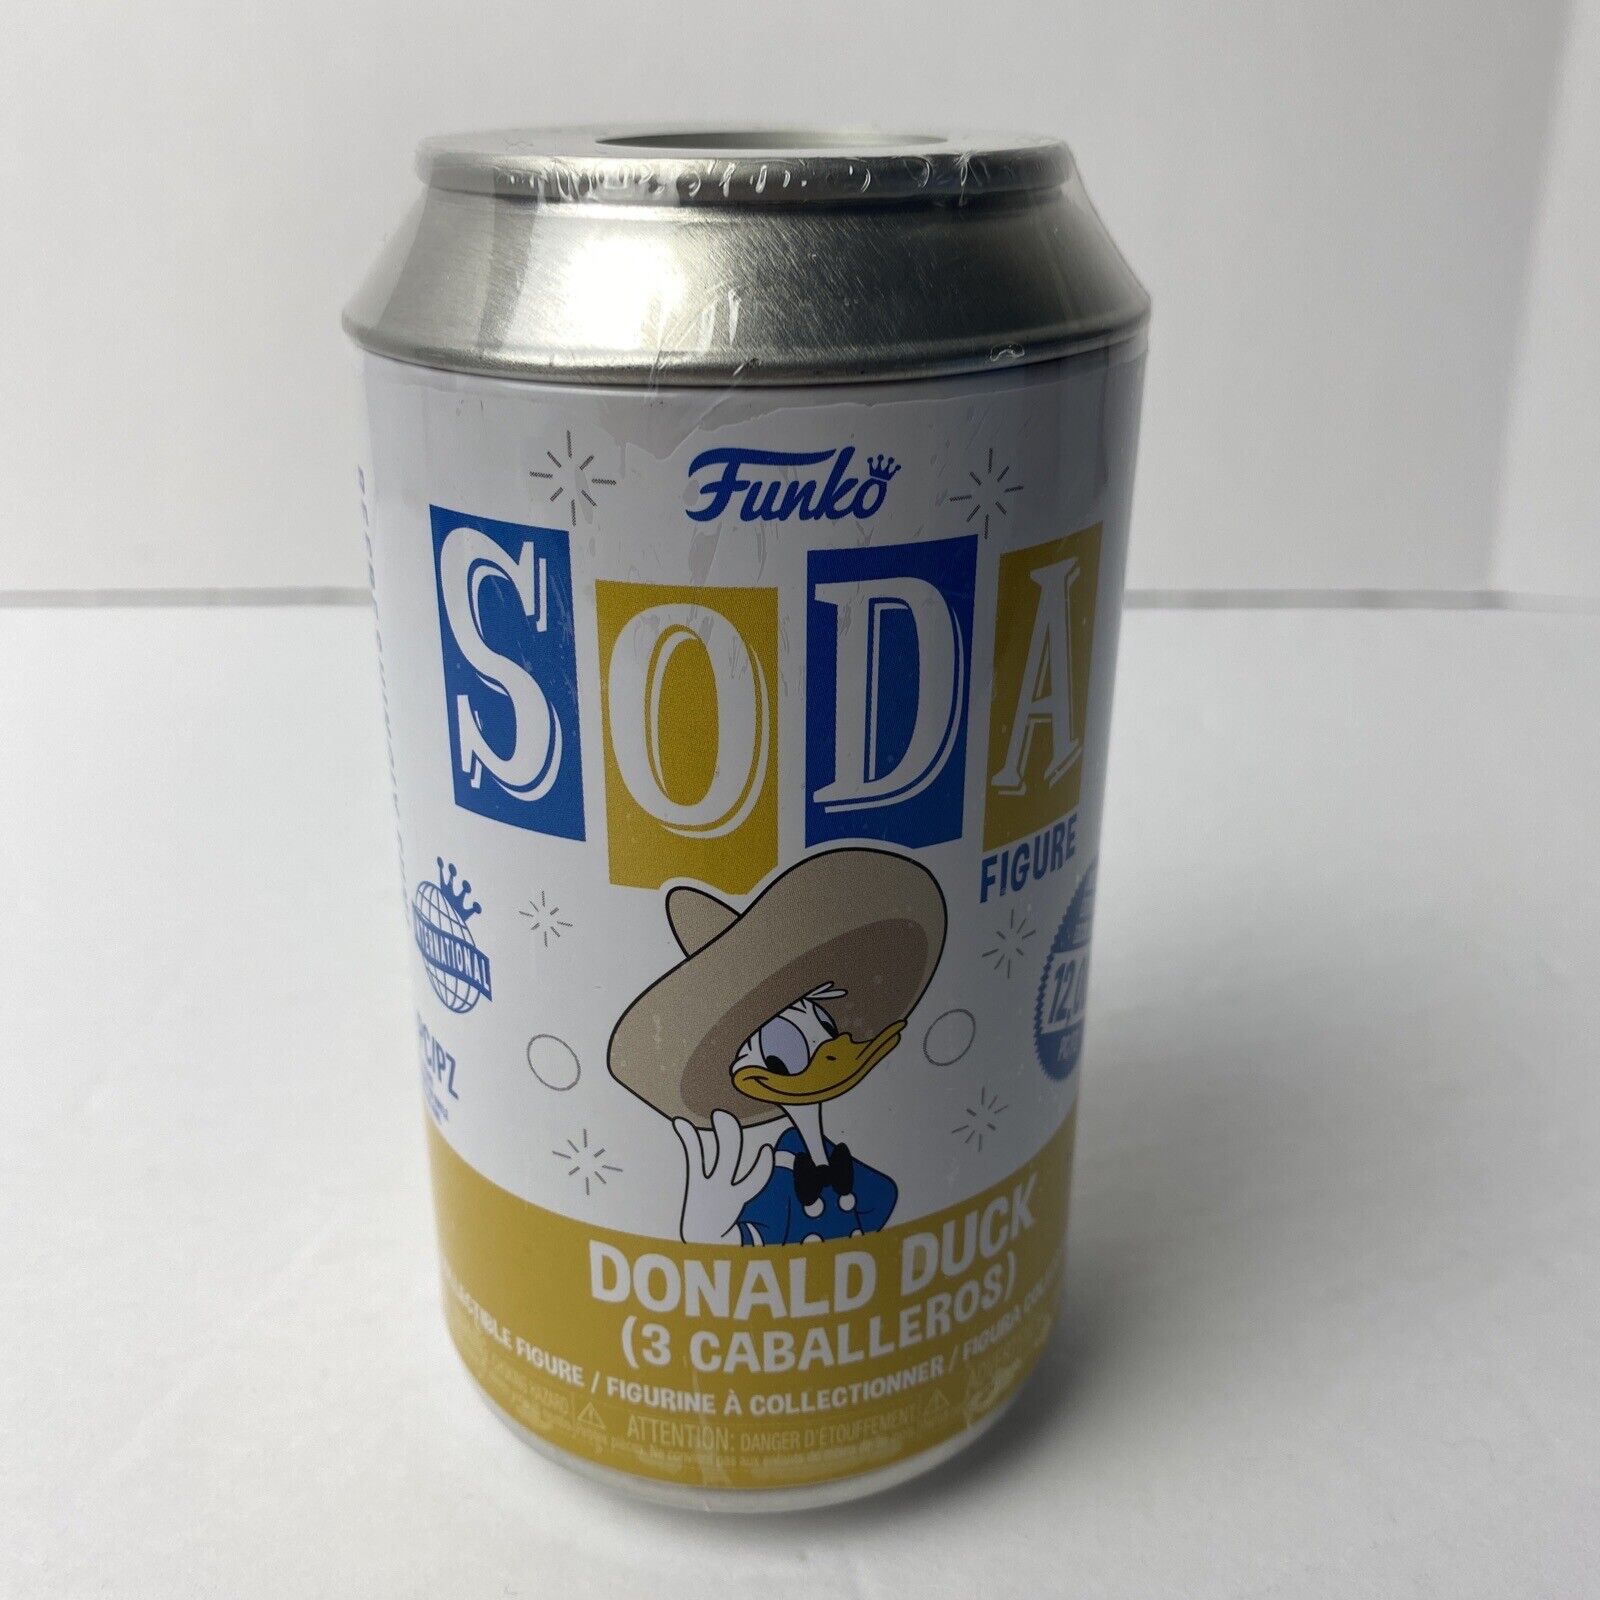 Funko Soda Disney Donald Duck 3 Caballeros With Possible Chase (New/Sealed)